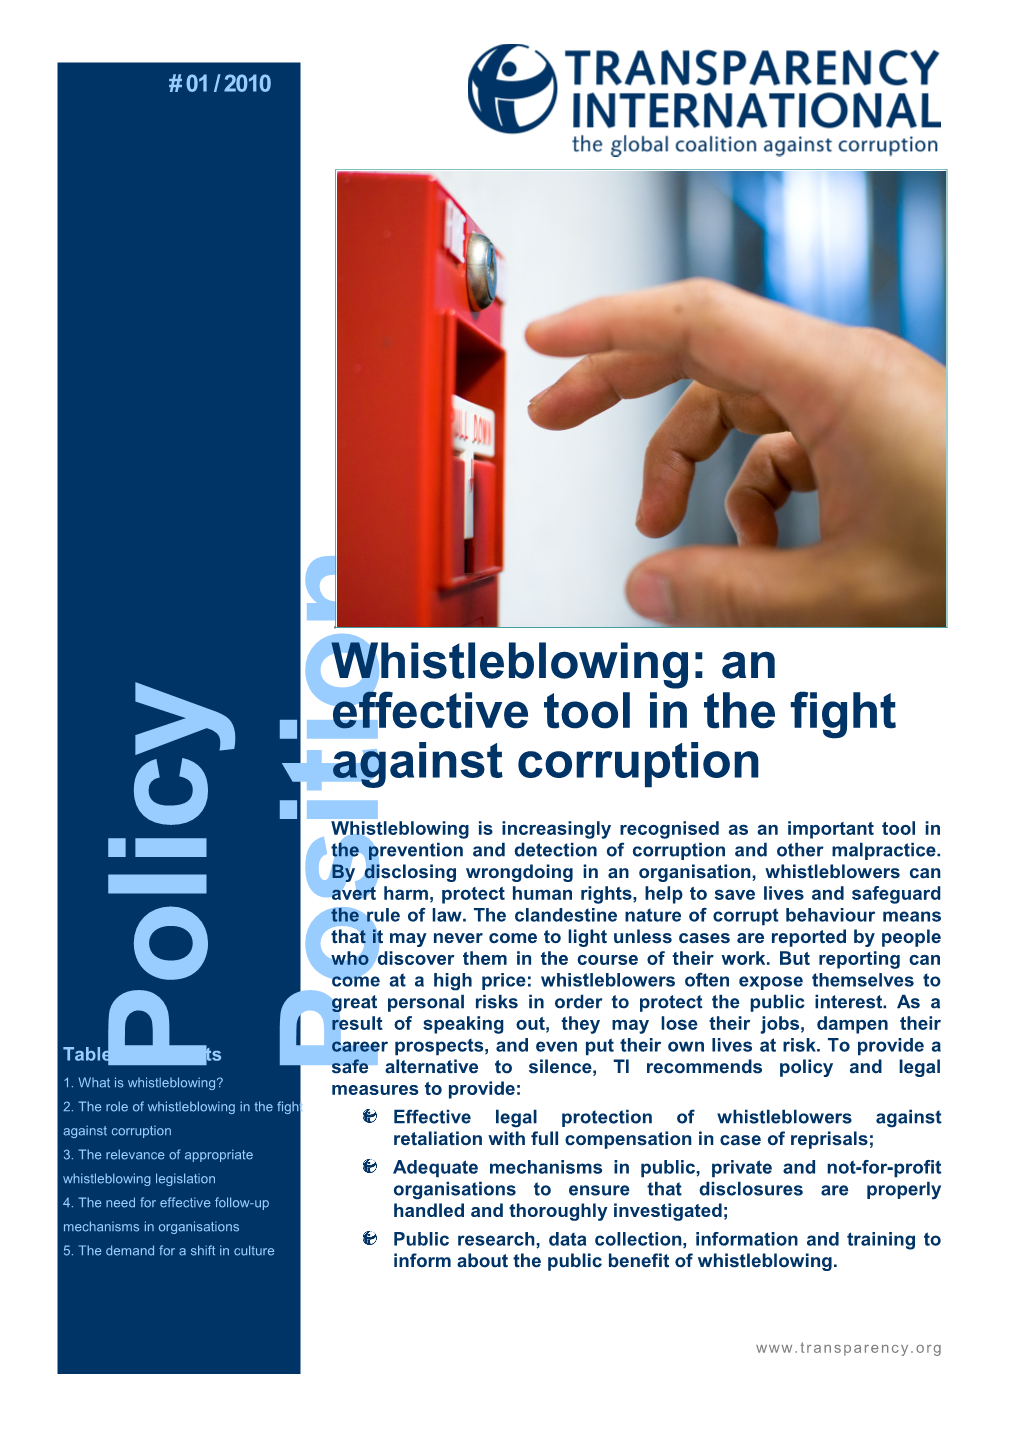 Whistleblowing: an Effective Tool in the Fight Against Corruption